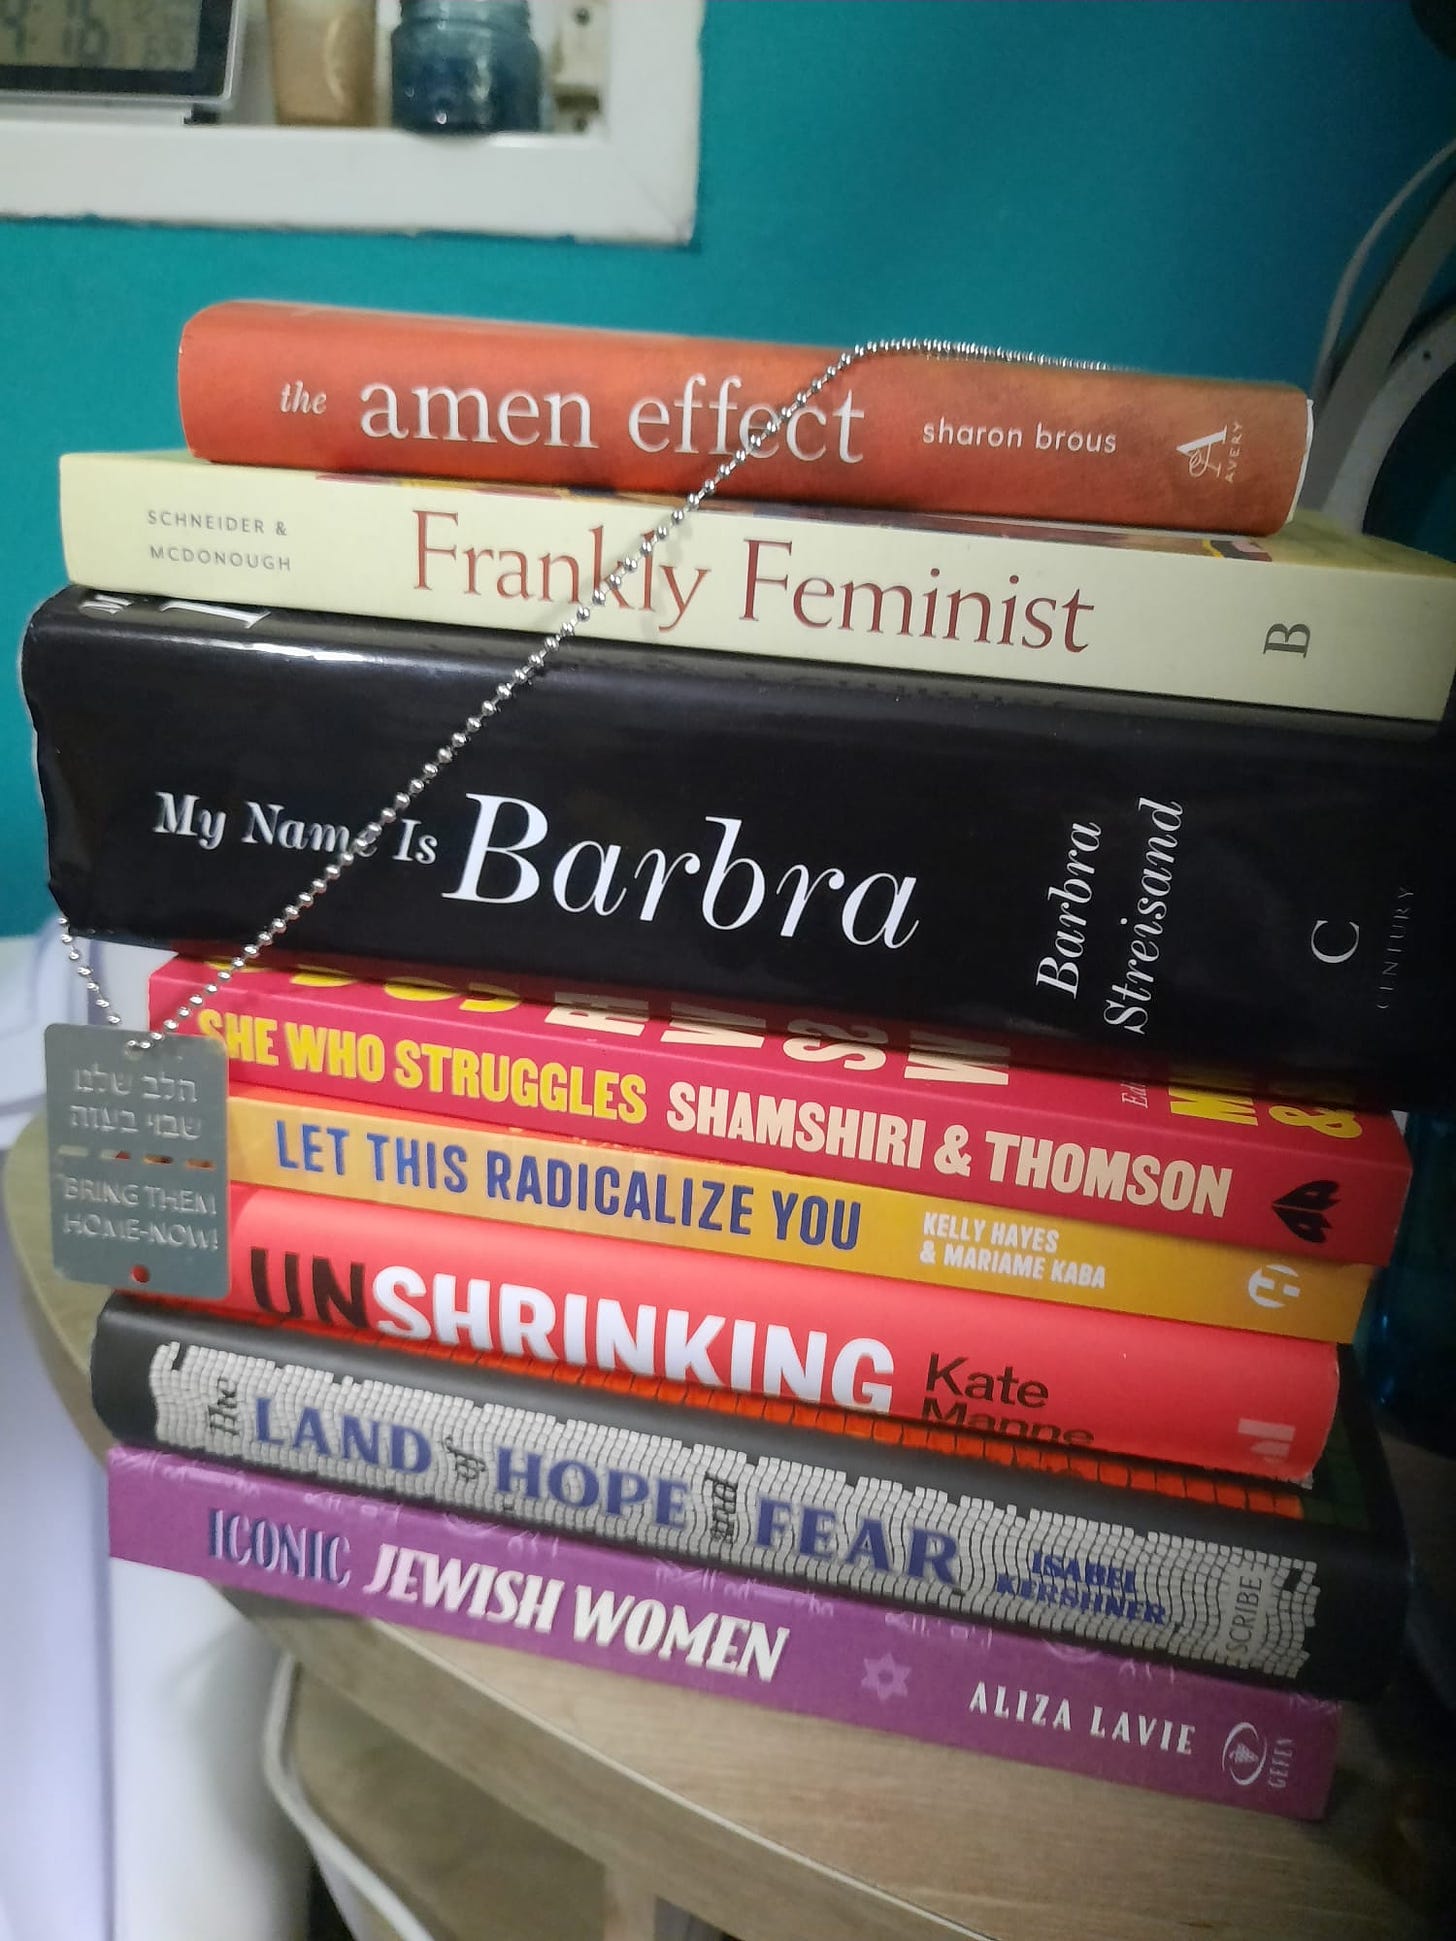 A pile of books on a desk, from top to bottom: The Amen Effect, My Name is Barbra, She Who Struggles, Let This Radicalize You, the Unshrinking, The Land of Hope and Fear, Iconic Jewish Women. With a chain/dogtag hanging around it, the chain of hostages.